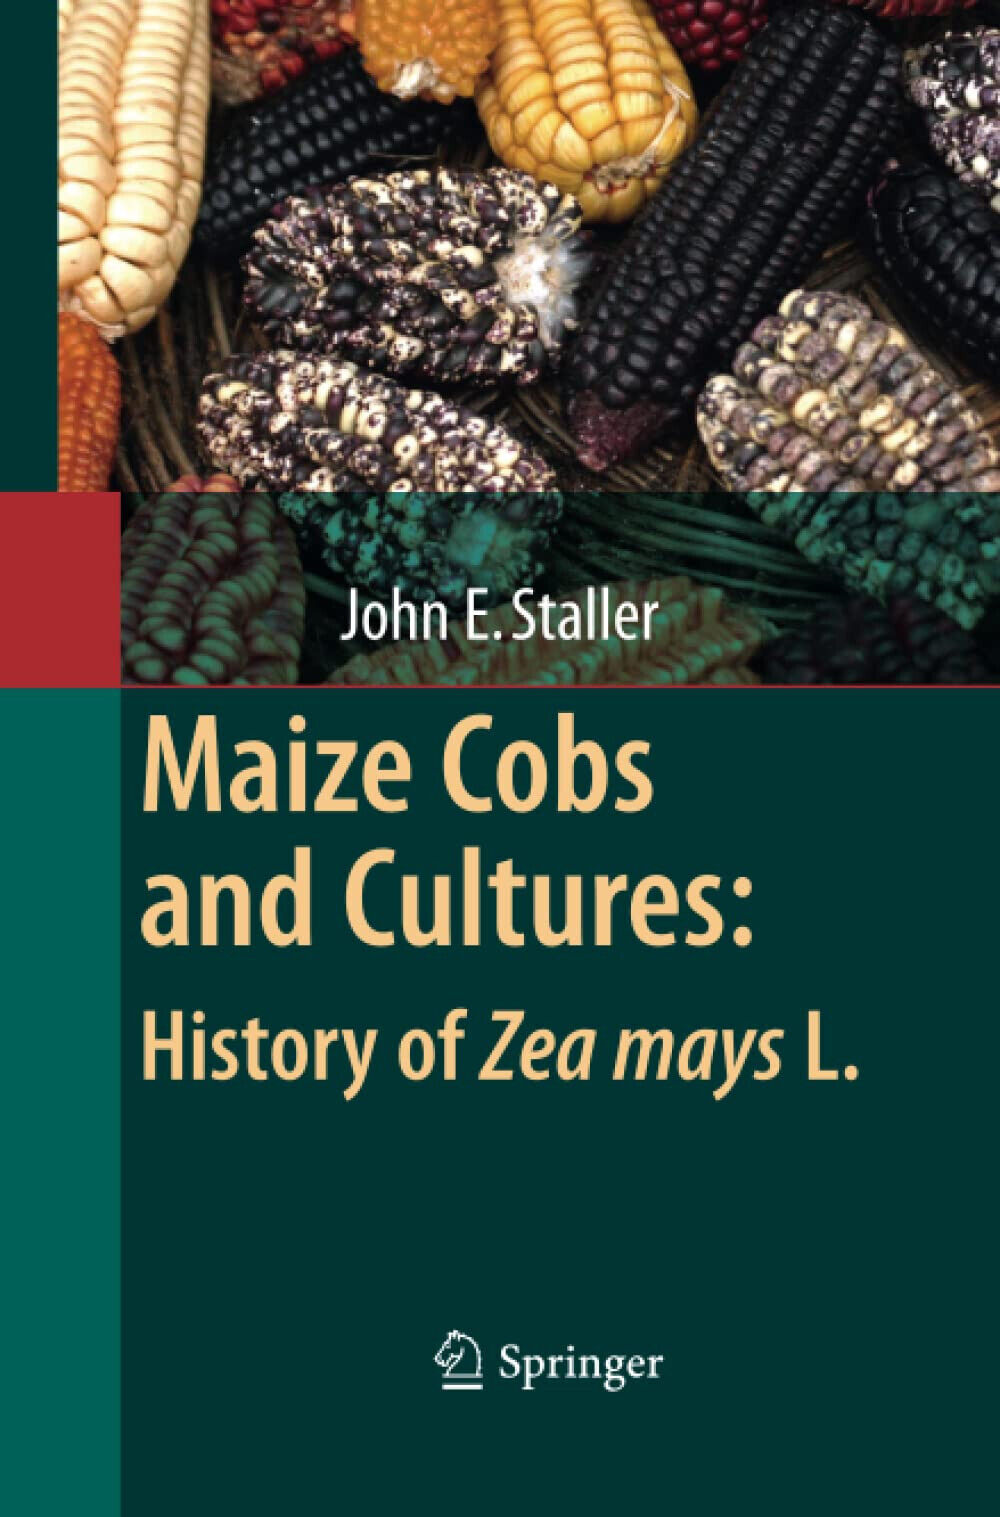 Maize Cobs and Cultures: History of Zea mays L. - Springer, 2014